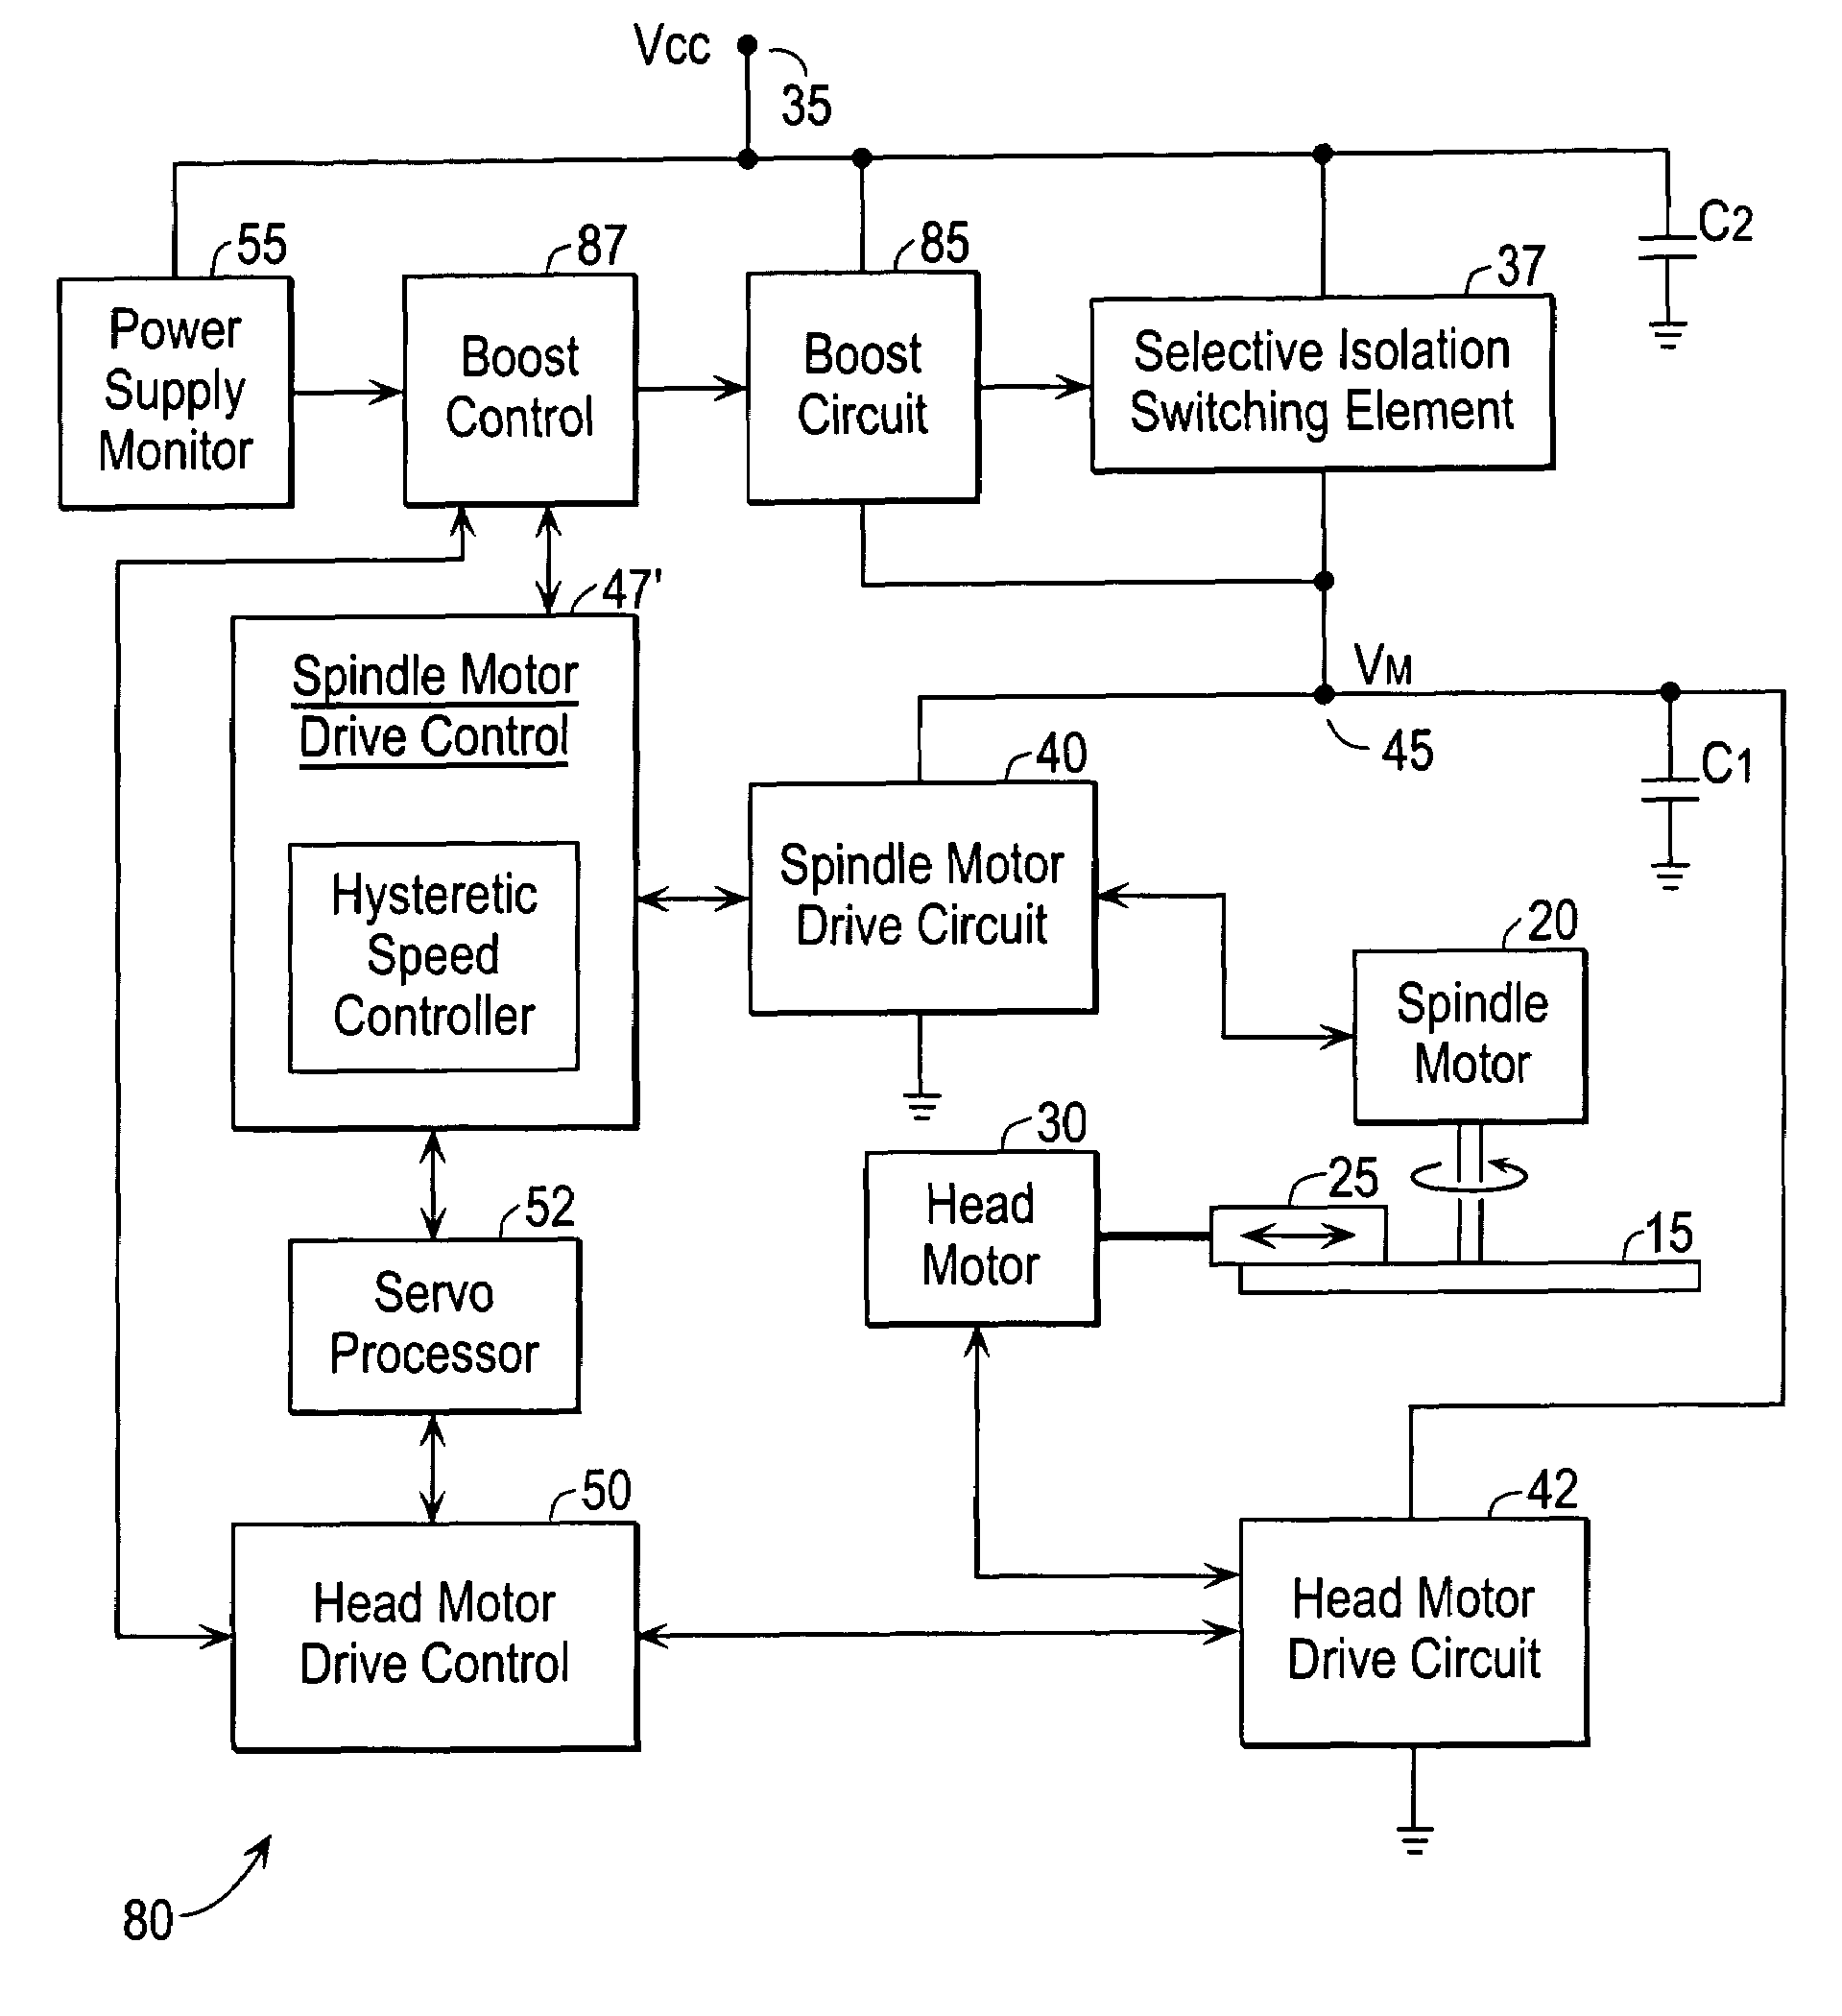 Motor drive circuitry with regenerative braking for disk drive